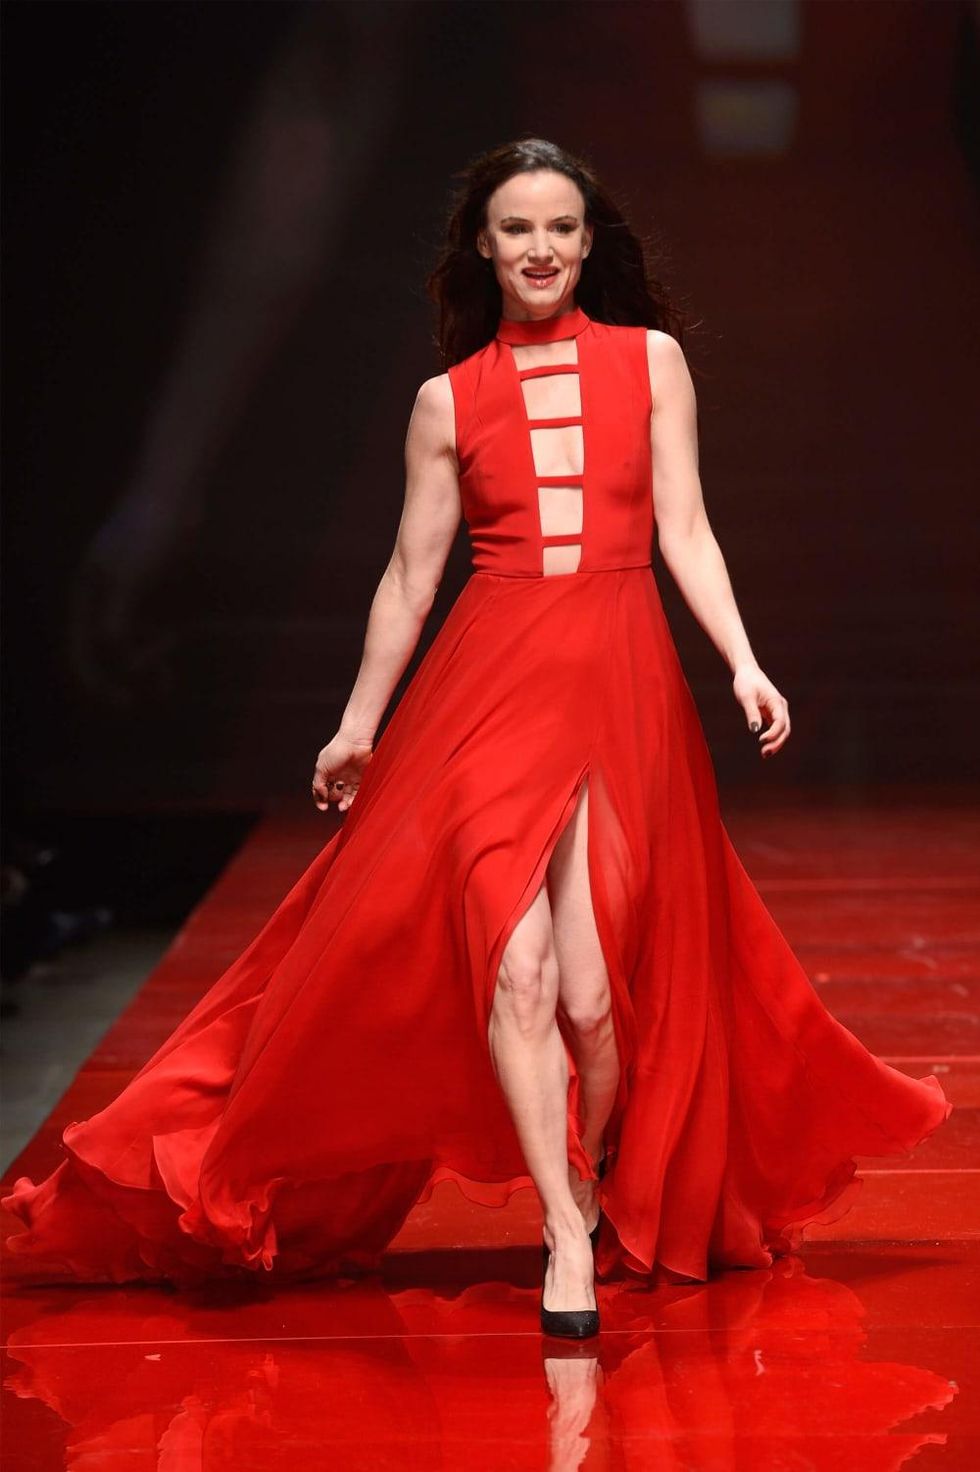 Actress Juliette Lewis walks the runway at the American Heart Association's Go Red For Women Red Dress Collection 2017